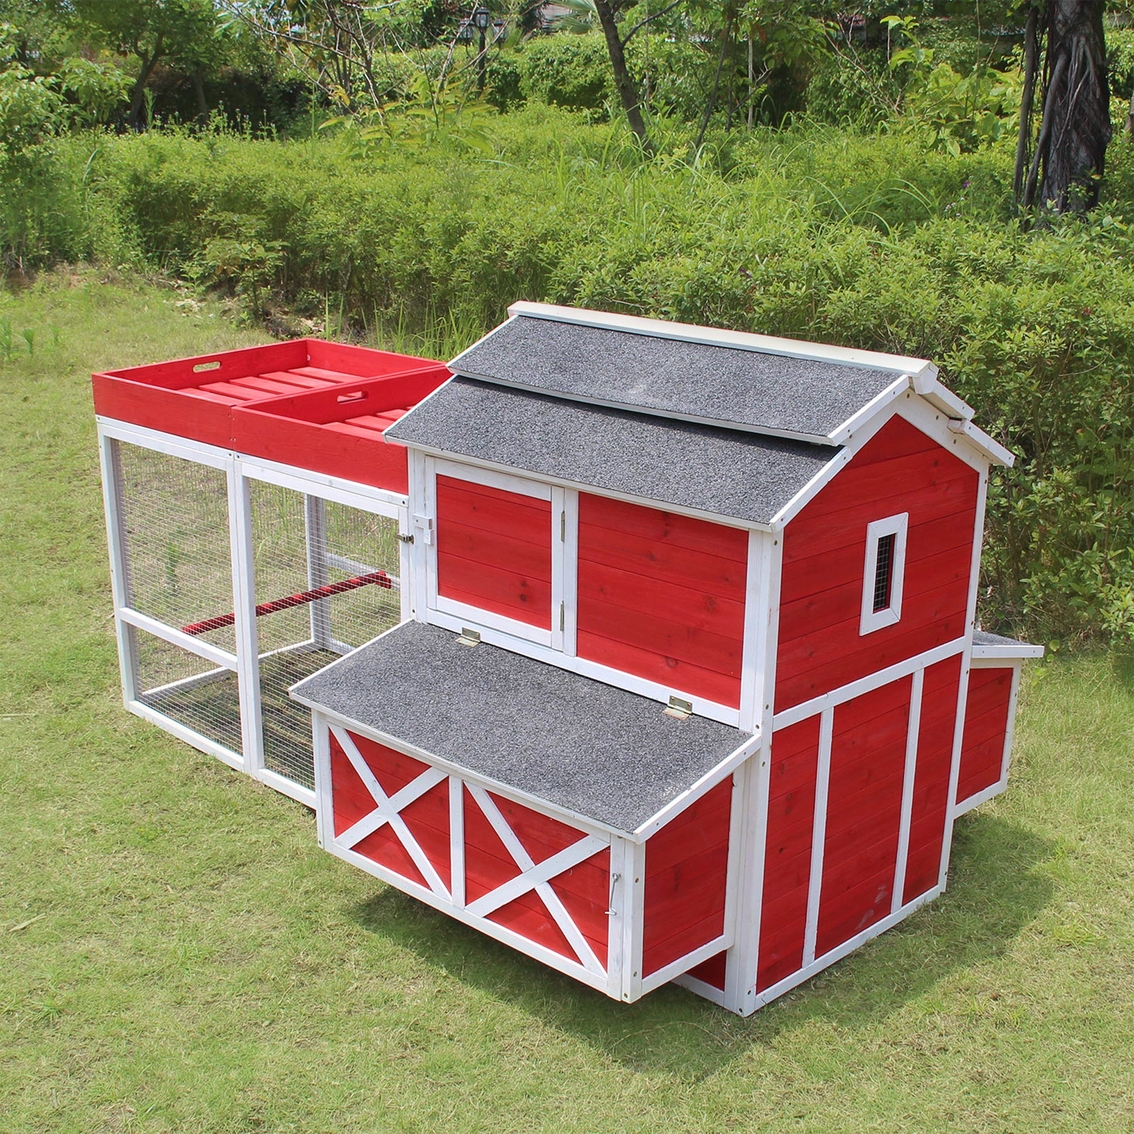 Merry Products Red Barn Chicken Coop - Image 2 of 4